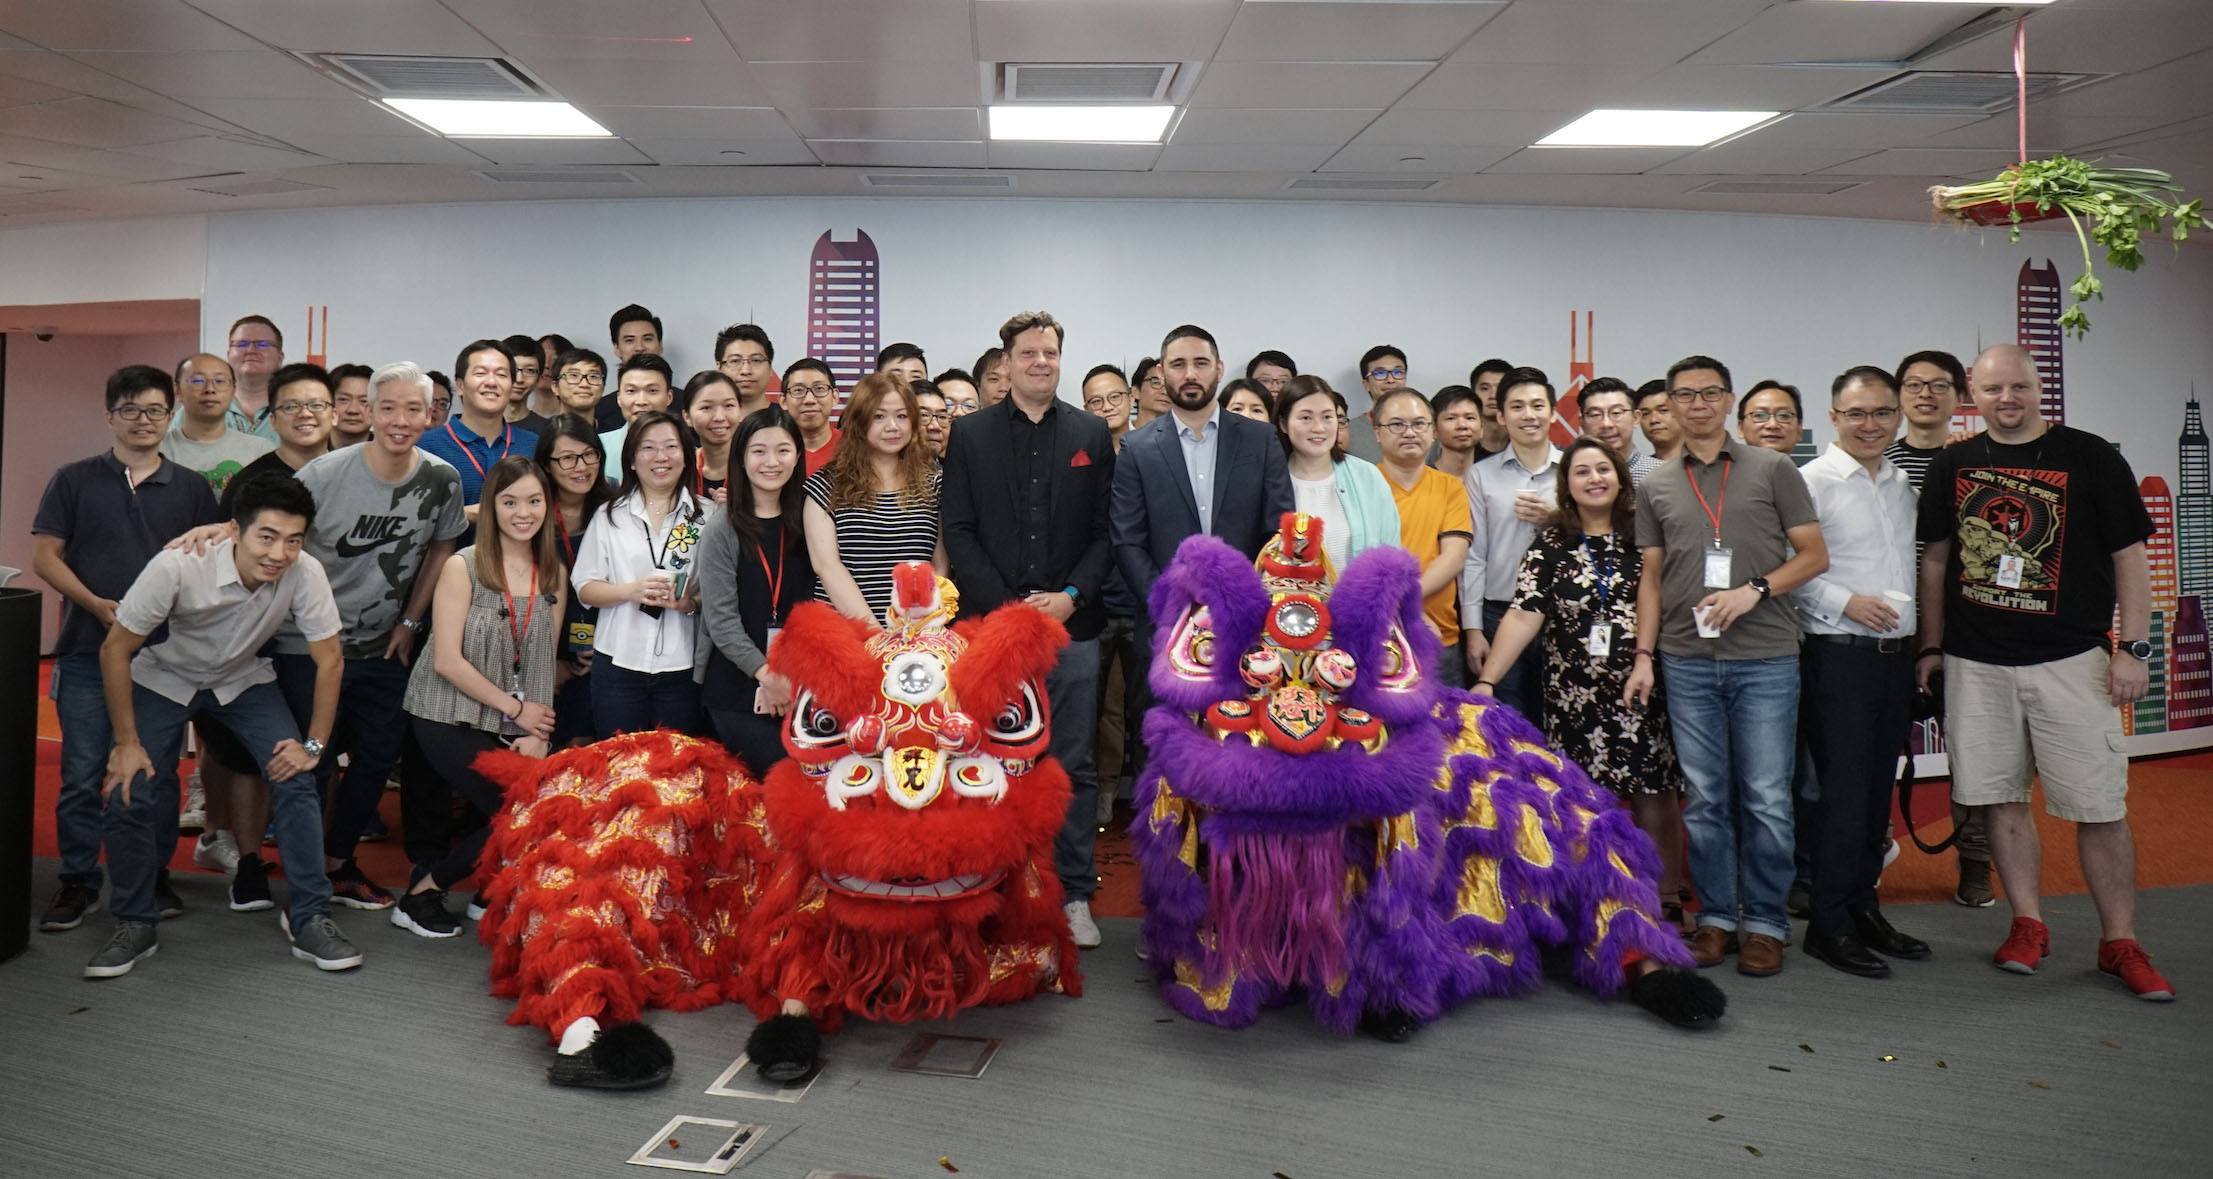 Rackspace’s Asia Presence Expands with Hong Kong Office